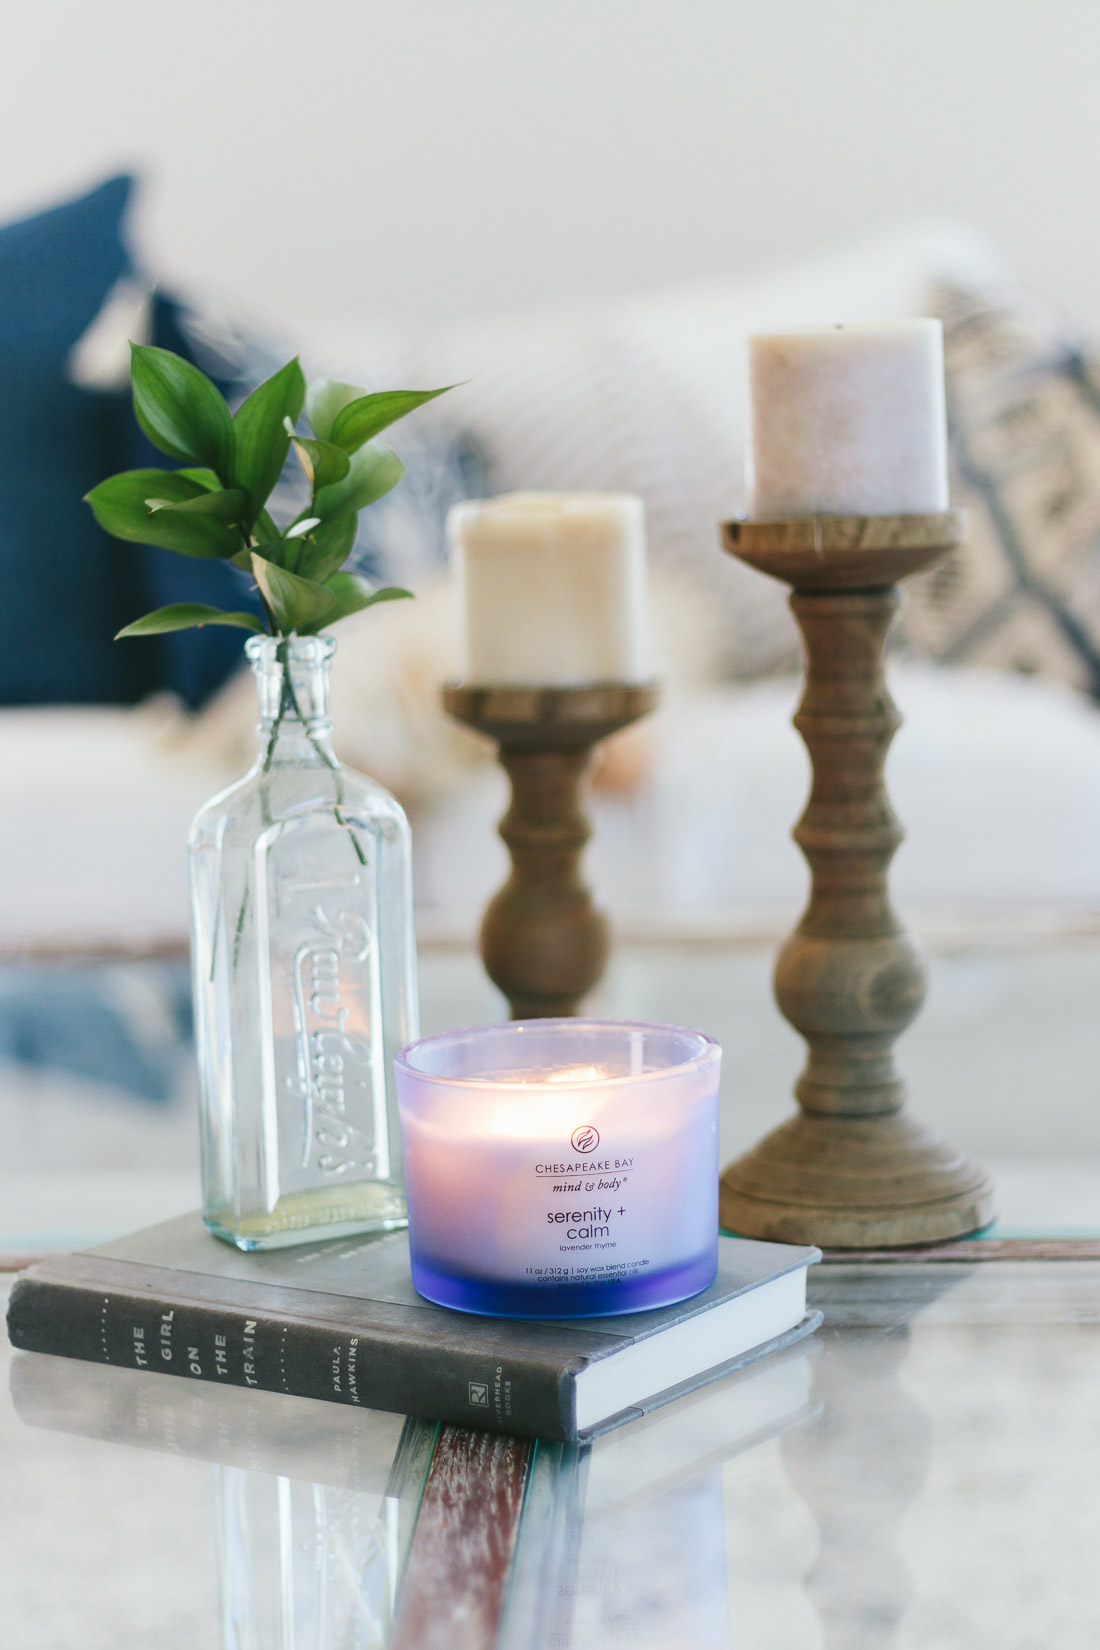 Relaxing essential oil candles I use in my home. Brooke of Pumps and Push-Ups